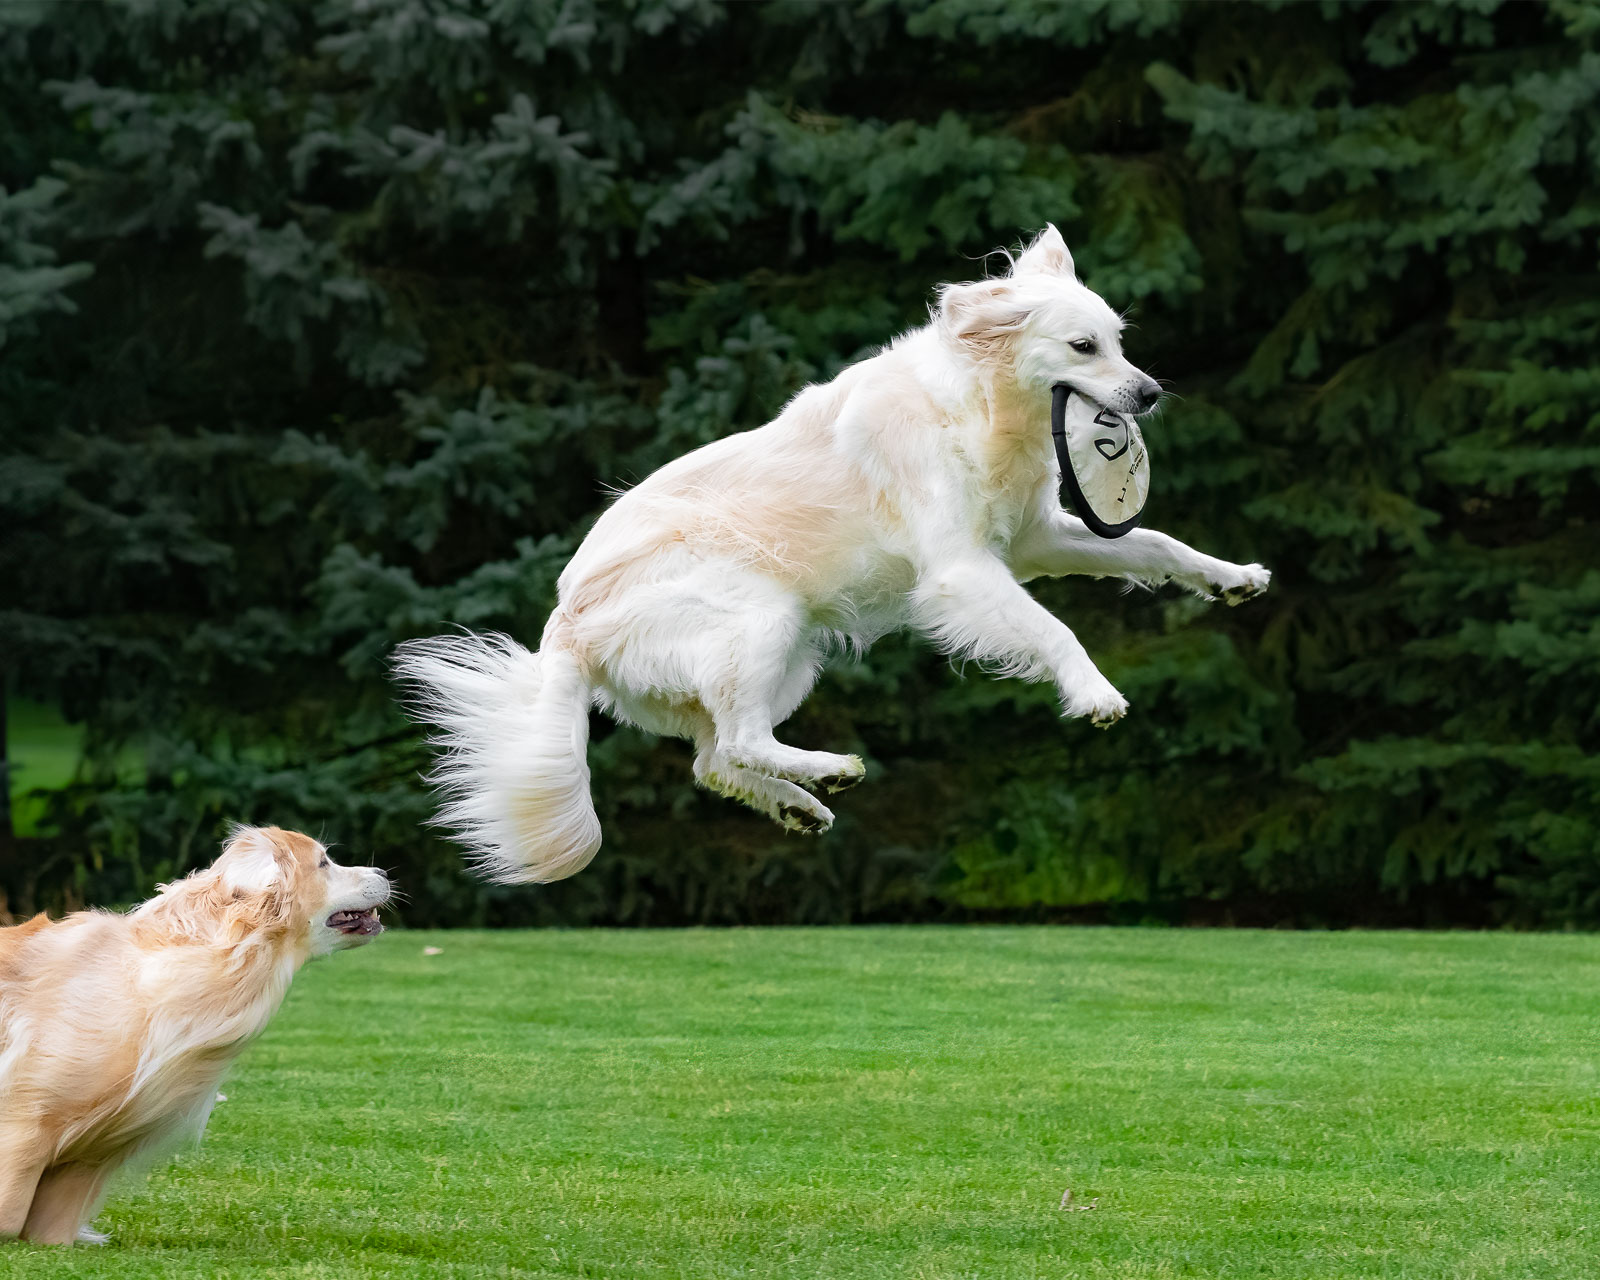 Golden Retriever catching a frisbee in mid-air